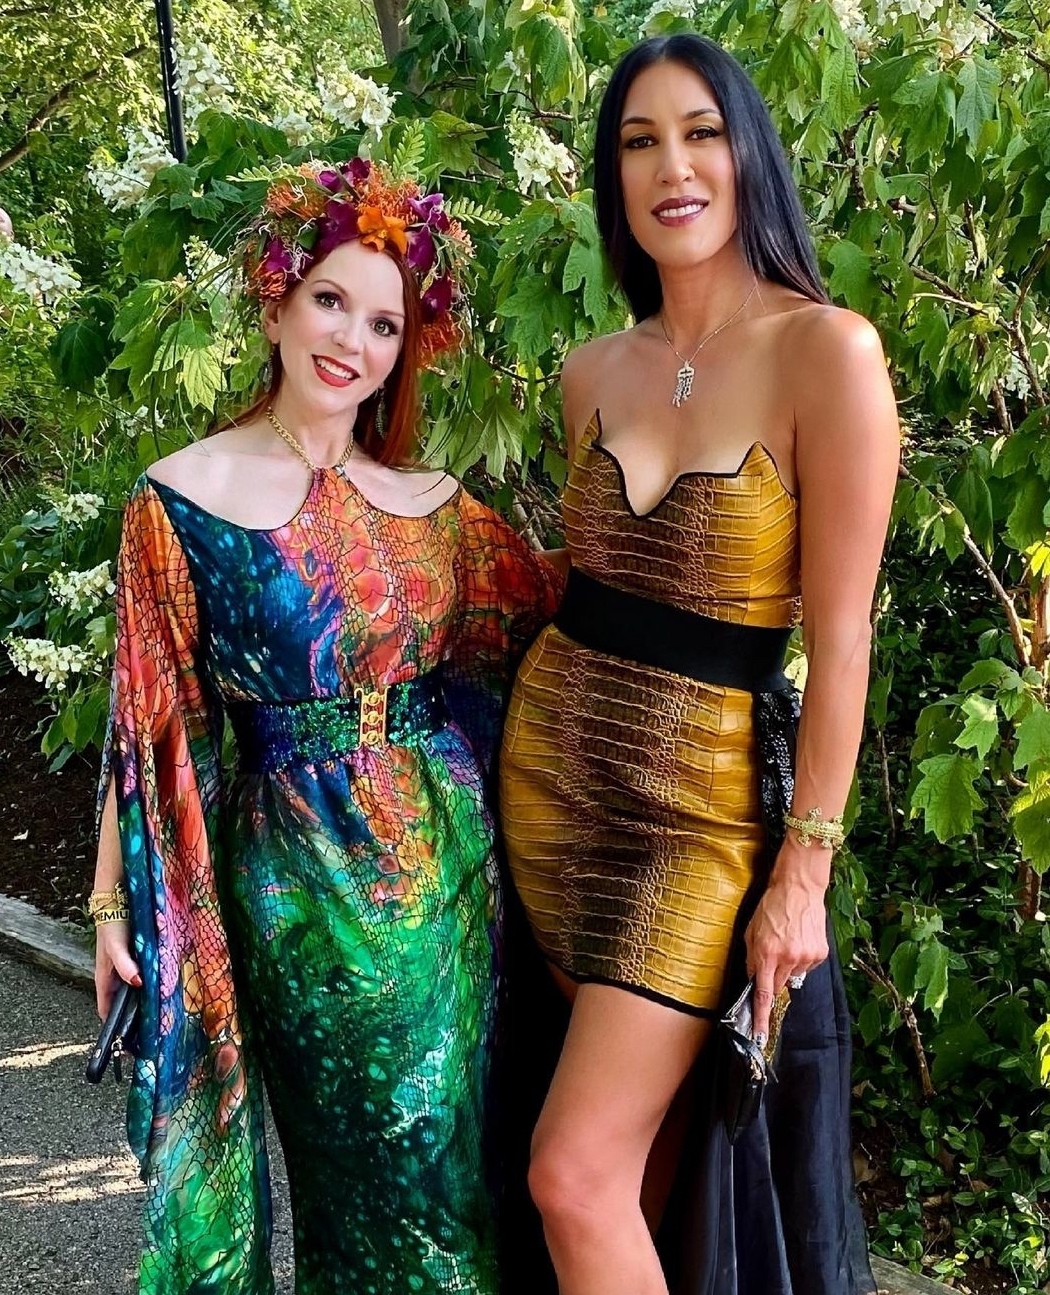 a white woman with red hair wearing a flower crown and a multi-colored dress next to a tall white woman with black hair wearing a golden dress